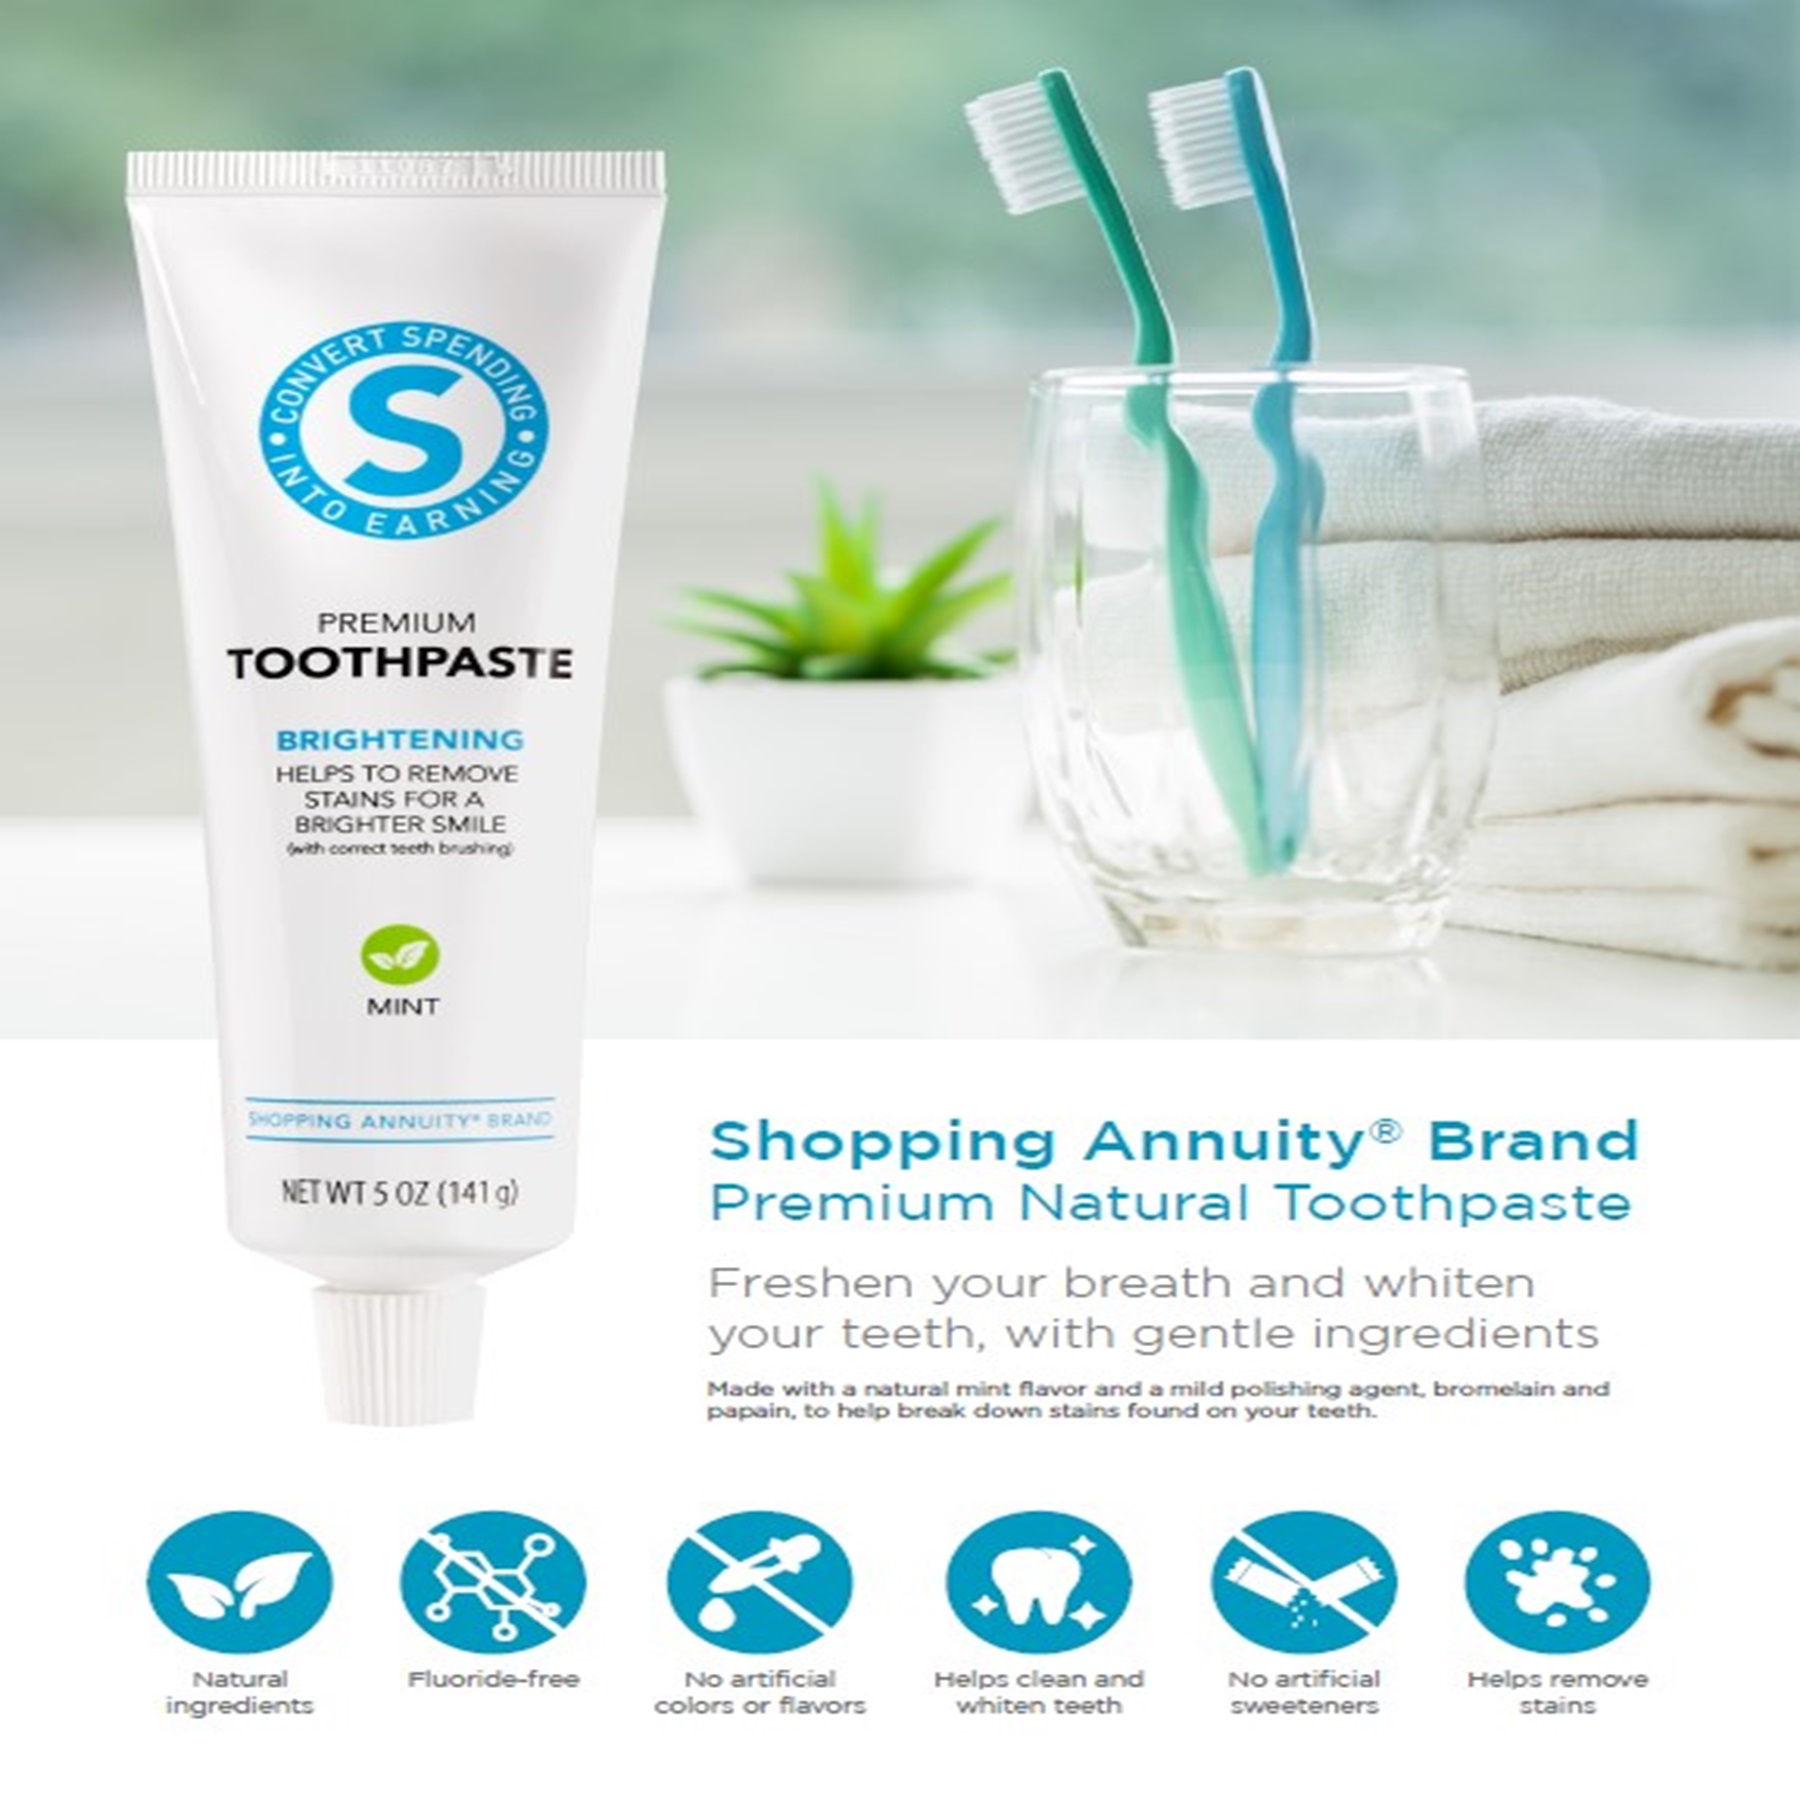 Primary Benefits of Shopping Annuity Brand Premium Natural Toothpaste